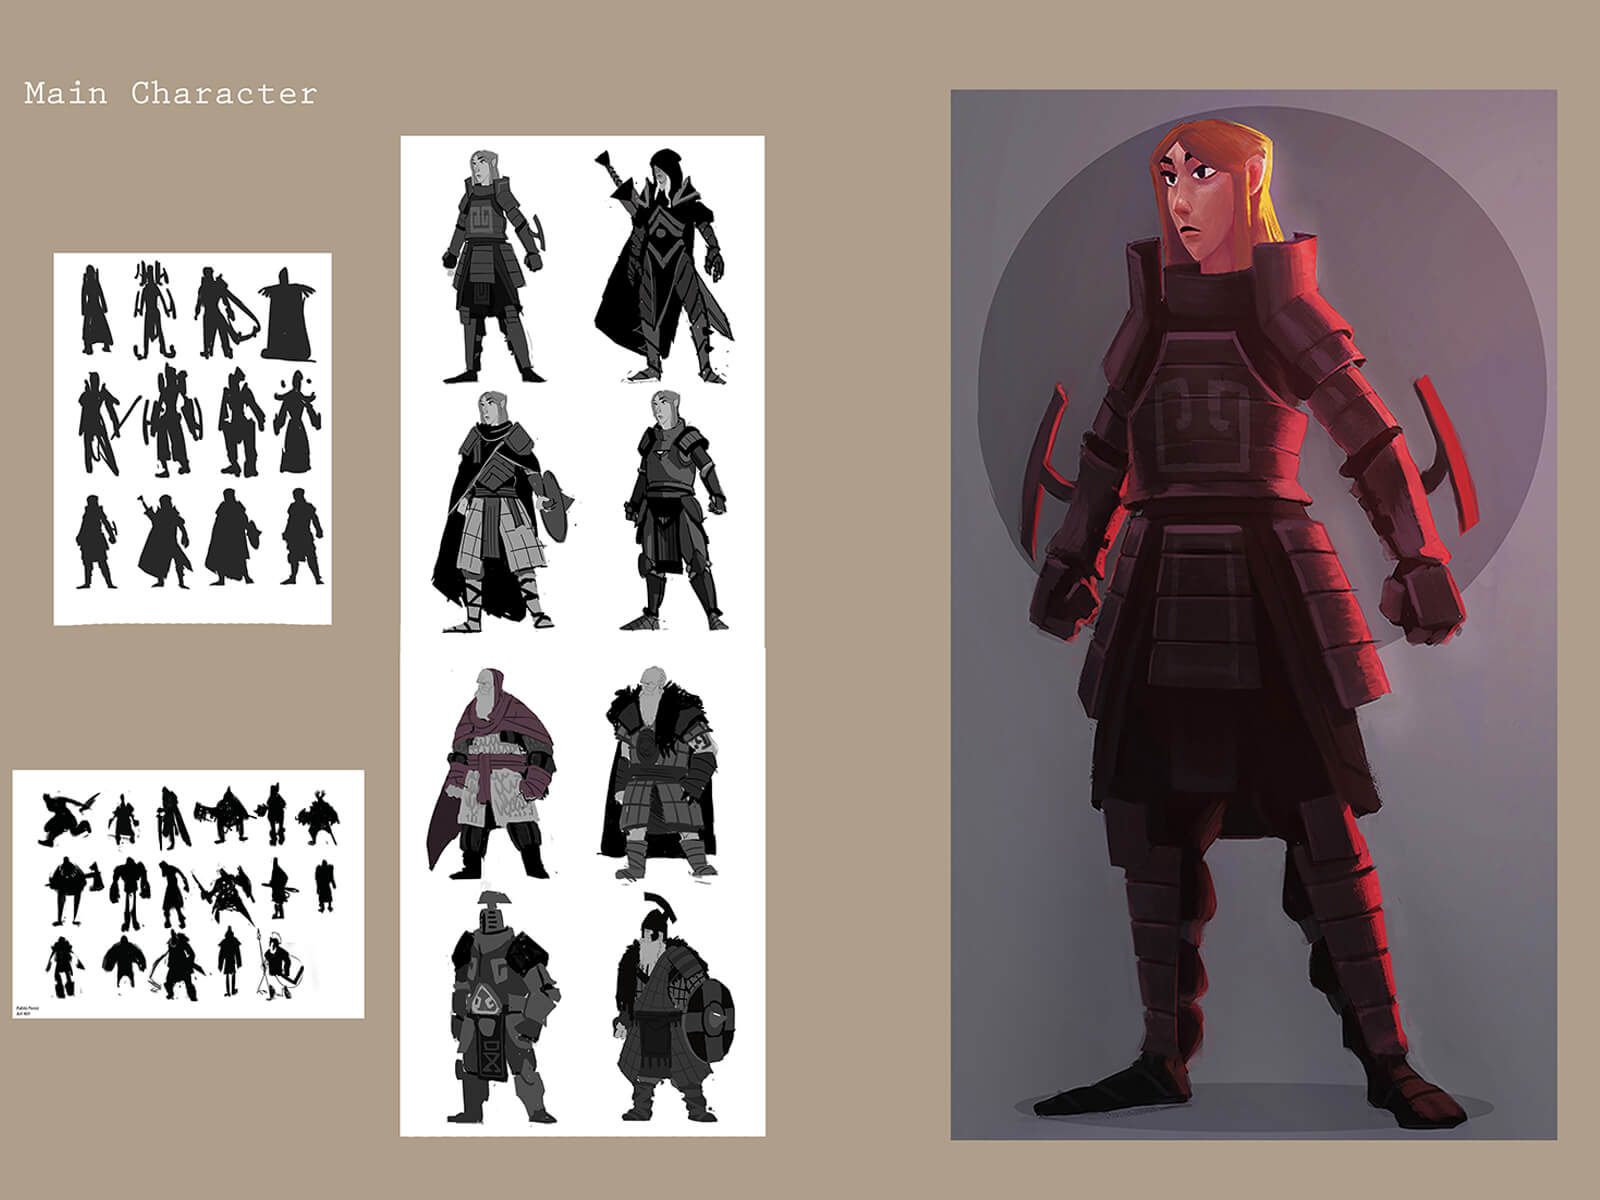 Black-and-white, color, and silhouette drawings of various warriors standing in different armor sets and styles.